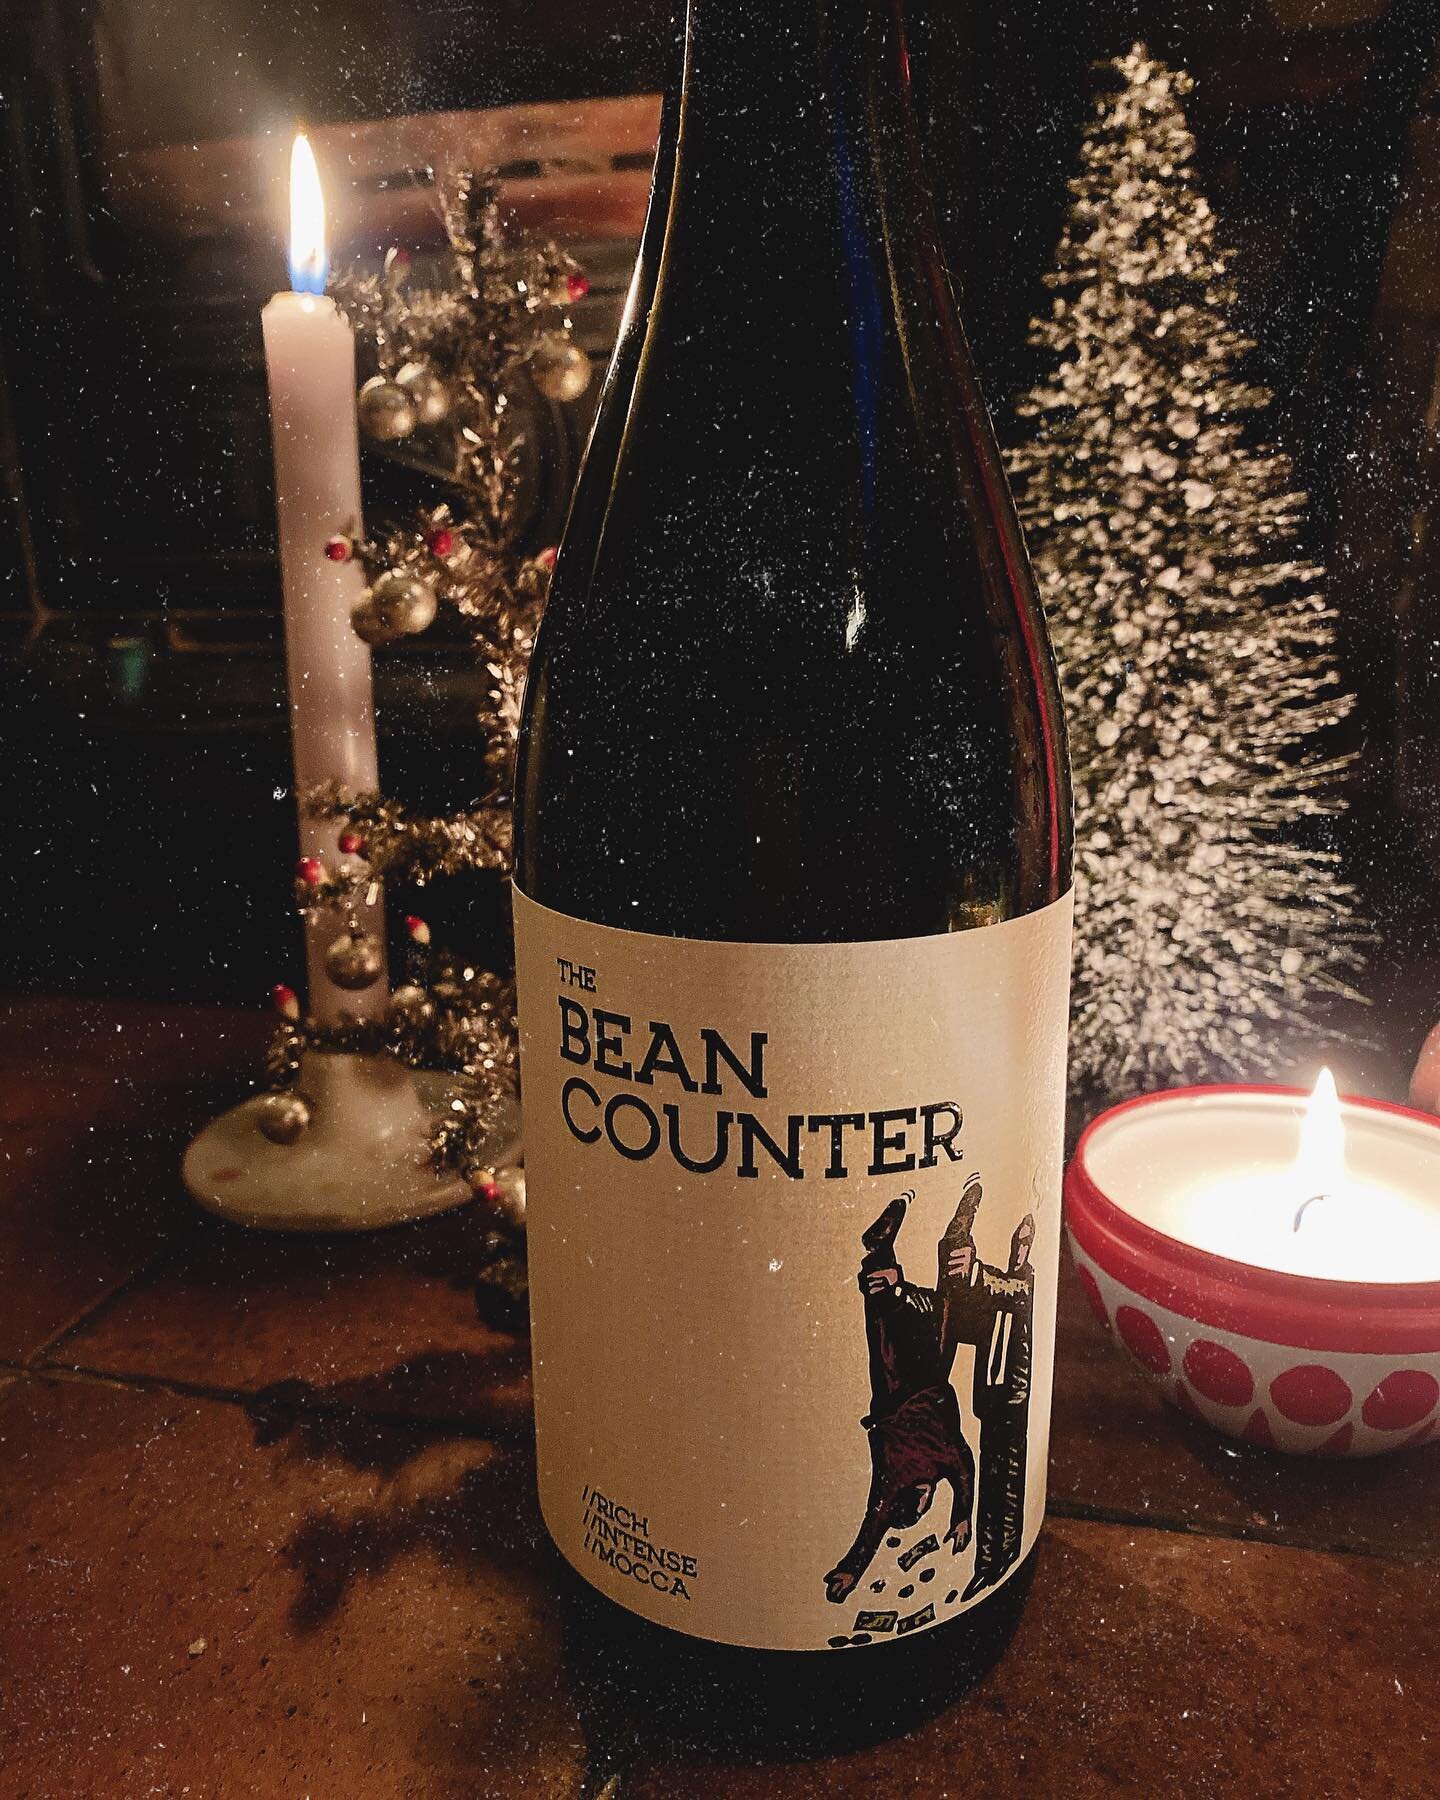 Even Scrooge would spend a few pennies on this beauty &amp; get cosy 🍷

Italy&rsquo;s Appassimento style made from Spain&rsquo;s Monastrell grapes&hellip;super special! 

#redwine #festivewine #christmaswine #scrooge #spanish #spanishwine #winesofsp